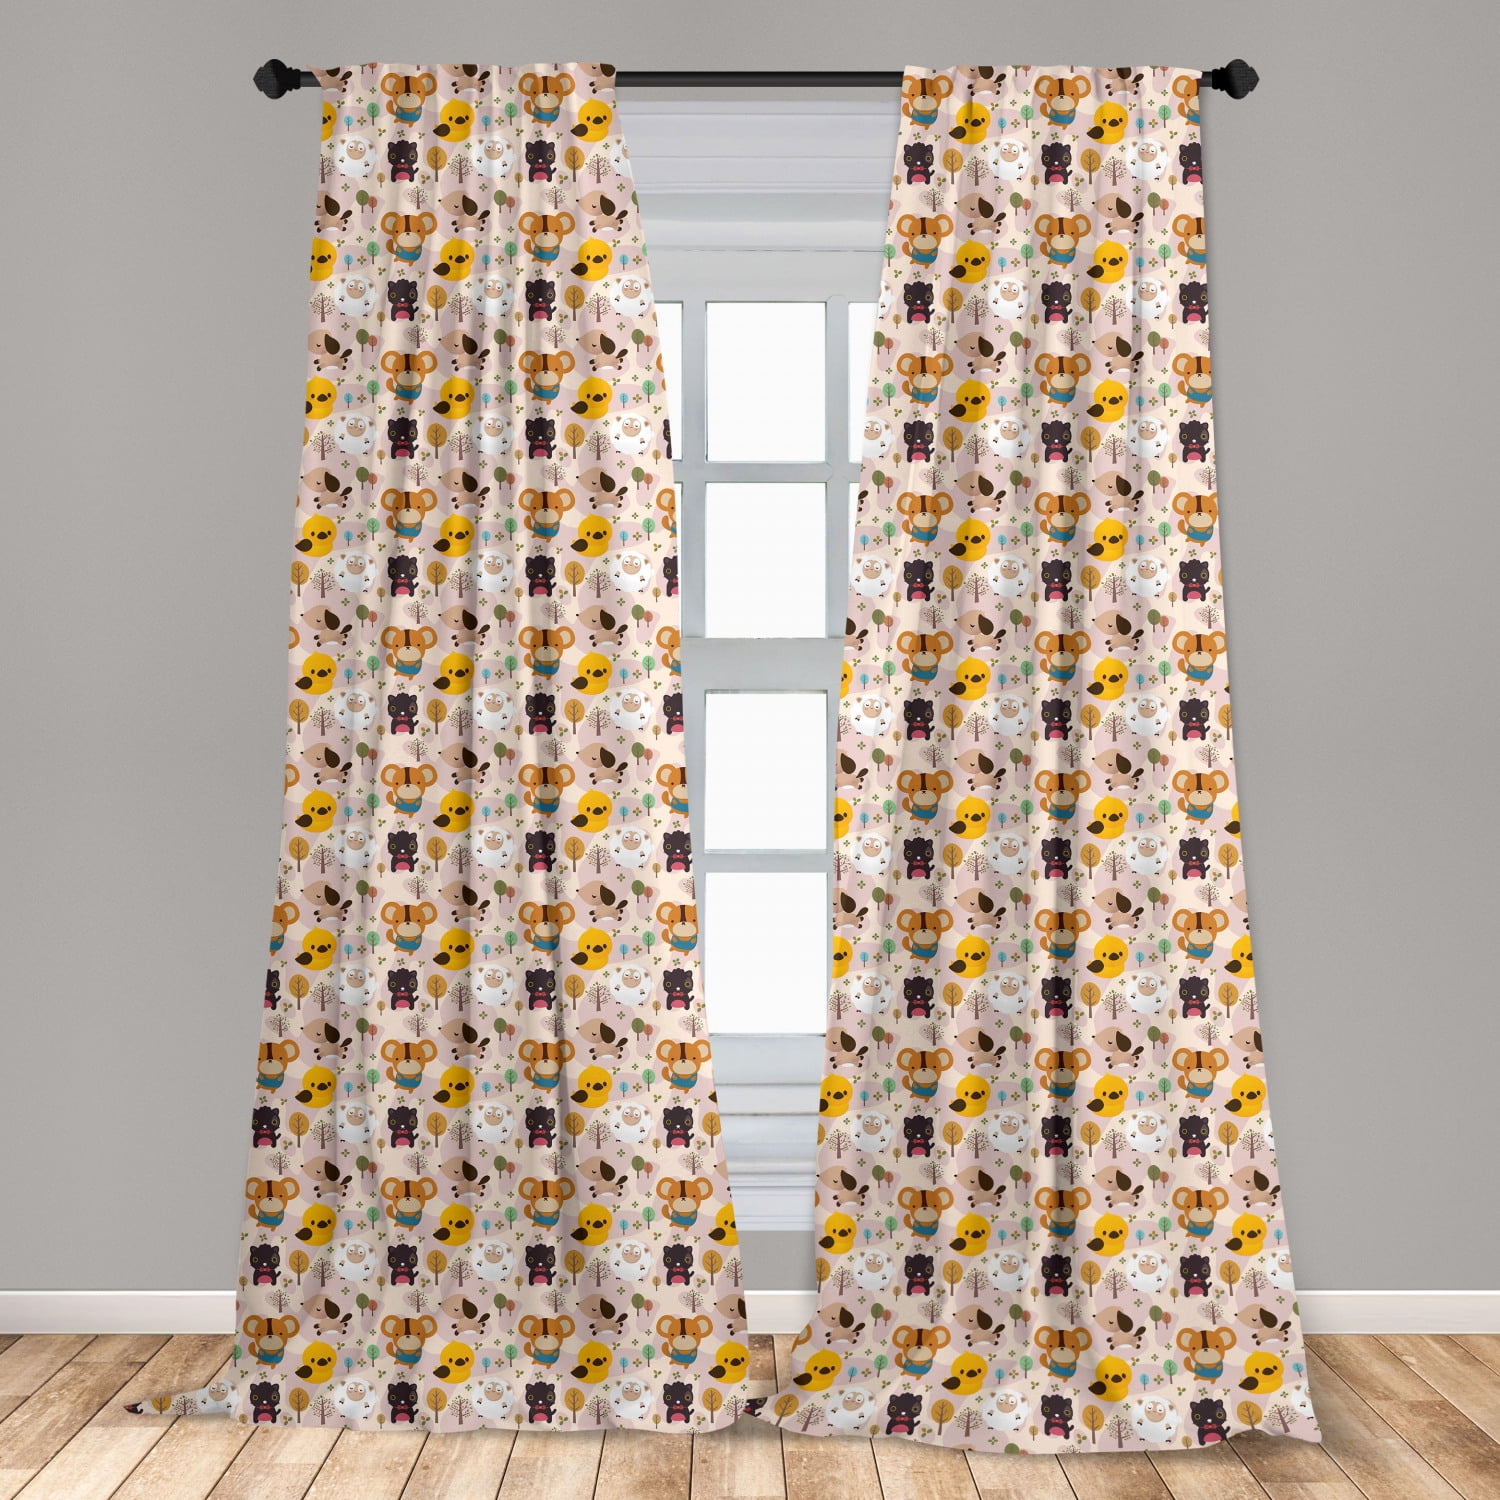 Nursery Curtains 2 Panels Set, Cartoon Style Animal Caricatures Very Jungle  Inhabitants Pattern Snowy Forest, Window Drapes for Living Room Bedroom,  56